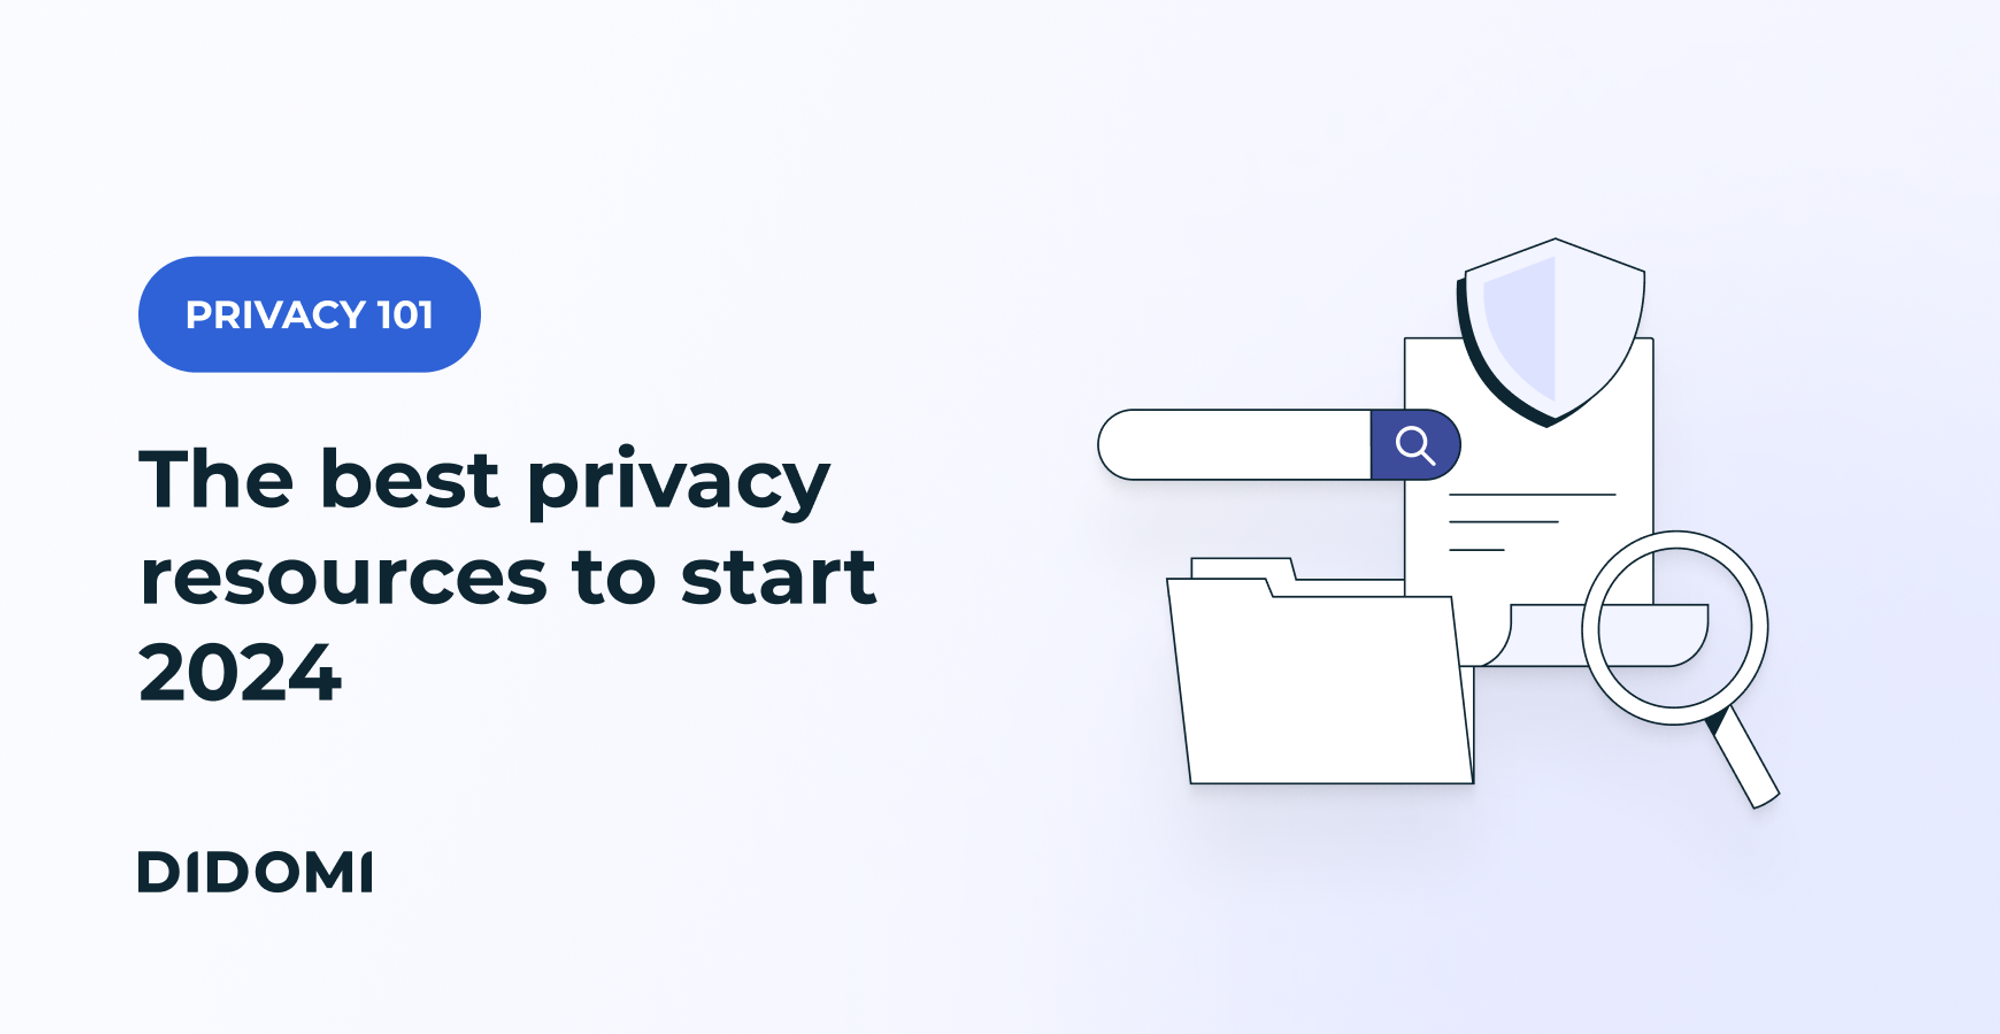 On the right side of the image, a drawing of a folder, documents and a magnifying glass. On the left, the mention "Privacy 101" and the title "The best privacy resources to start 2023"